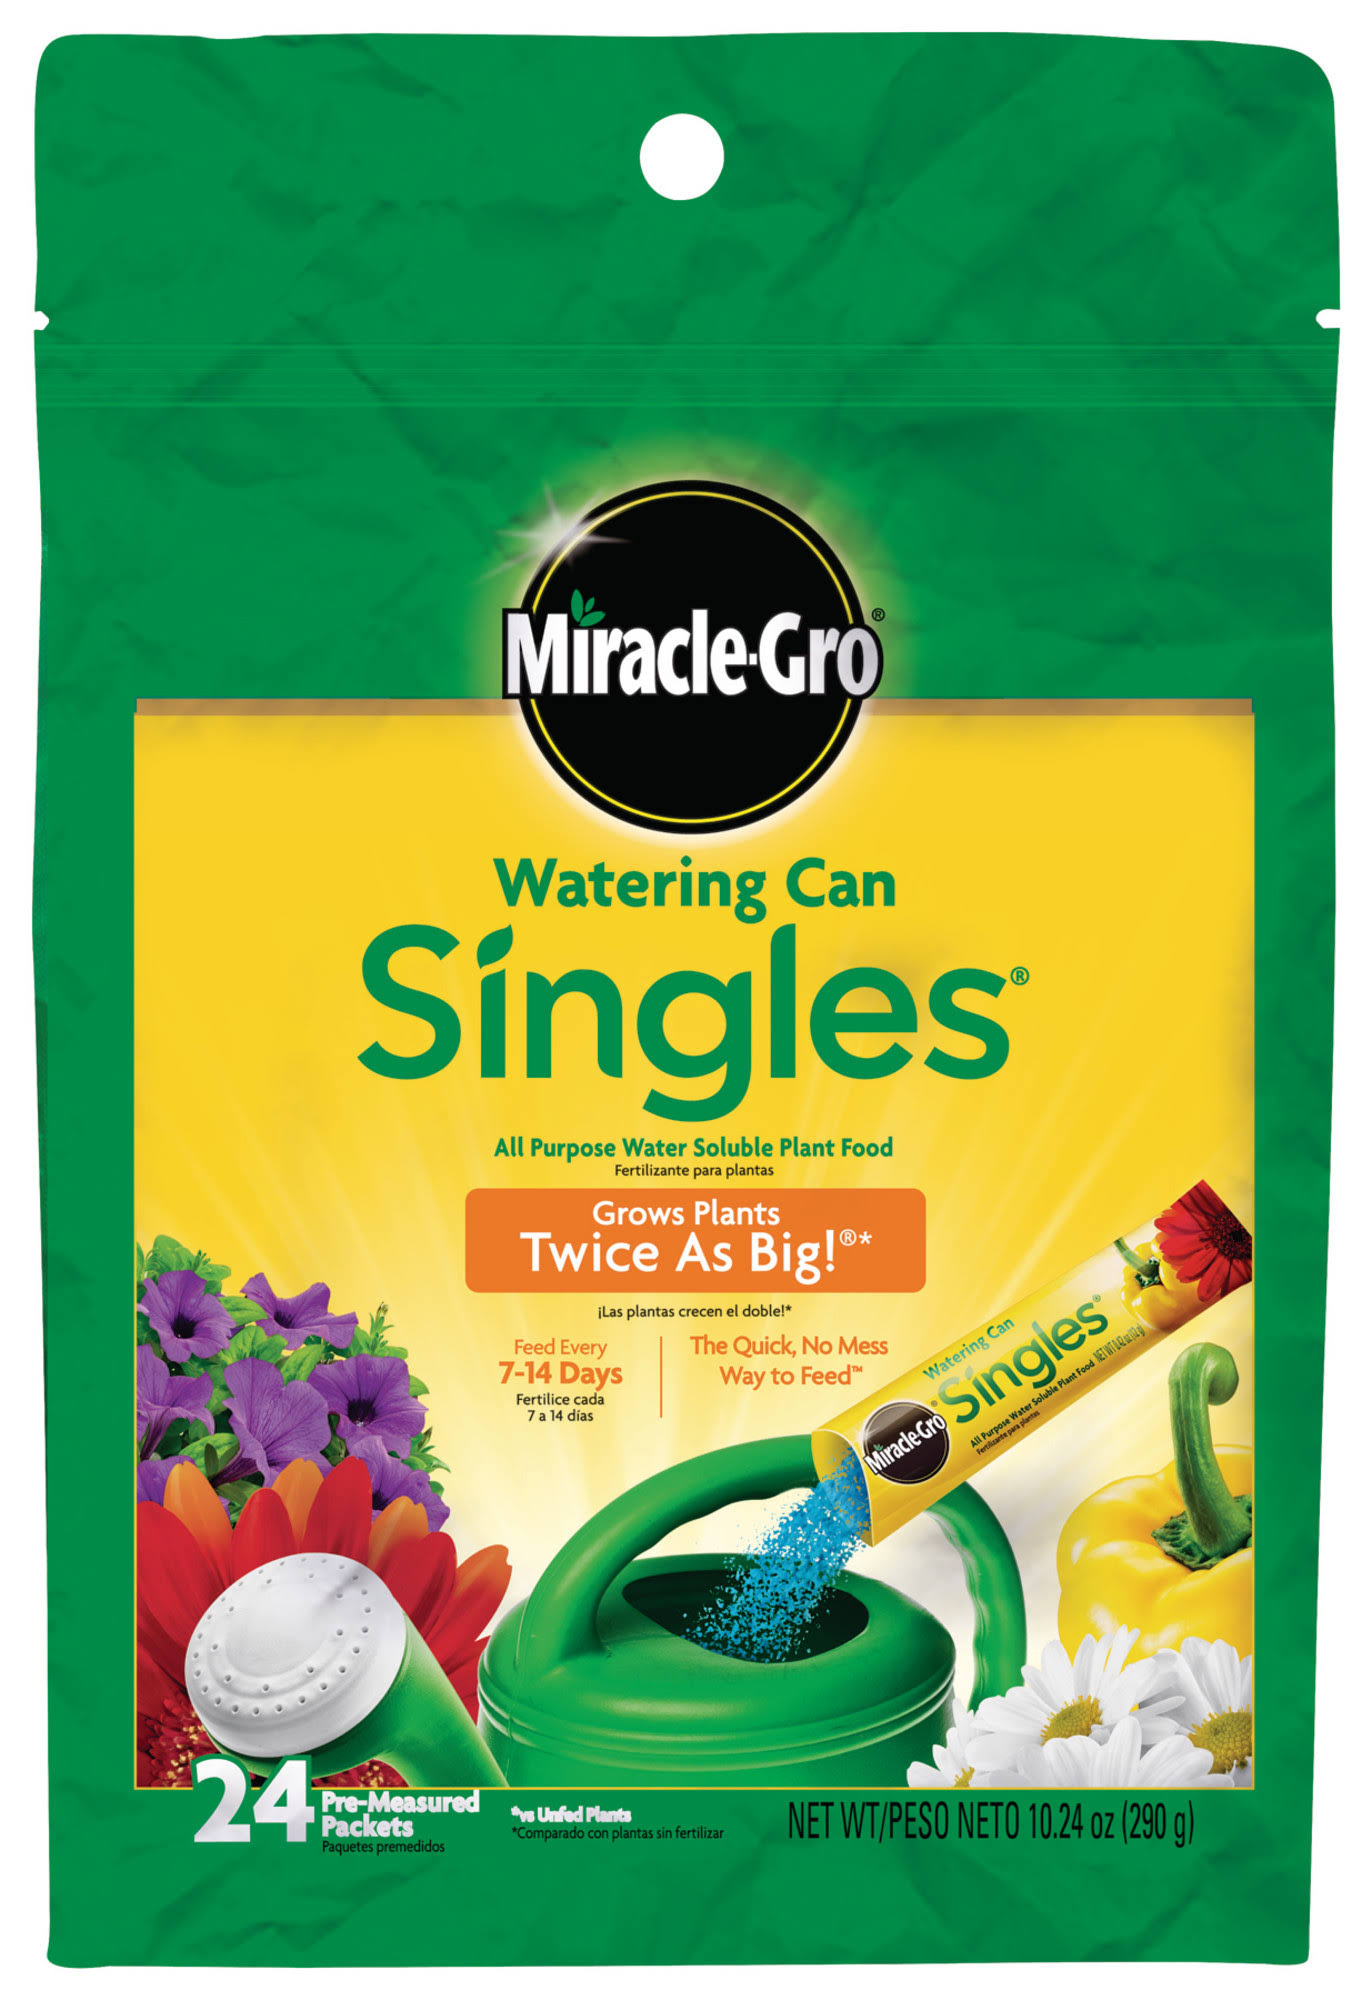 Miracle-Gro Watering Can Singles All Purpose Plant Food - Water-Soluble, 24 Pack